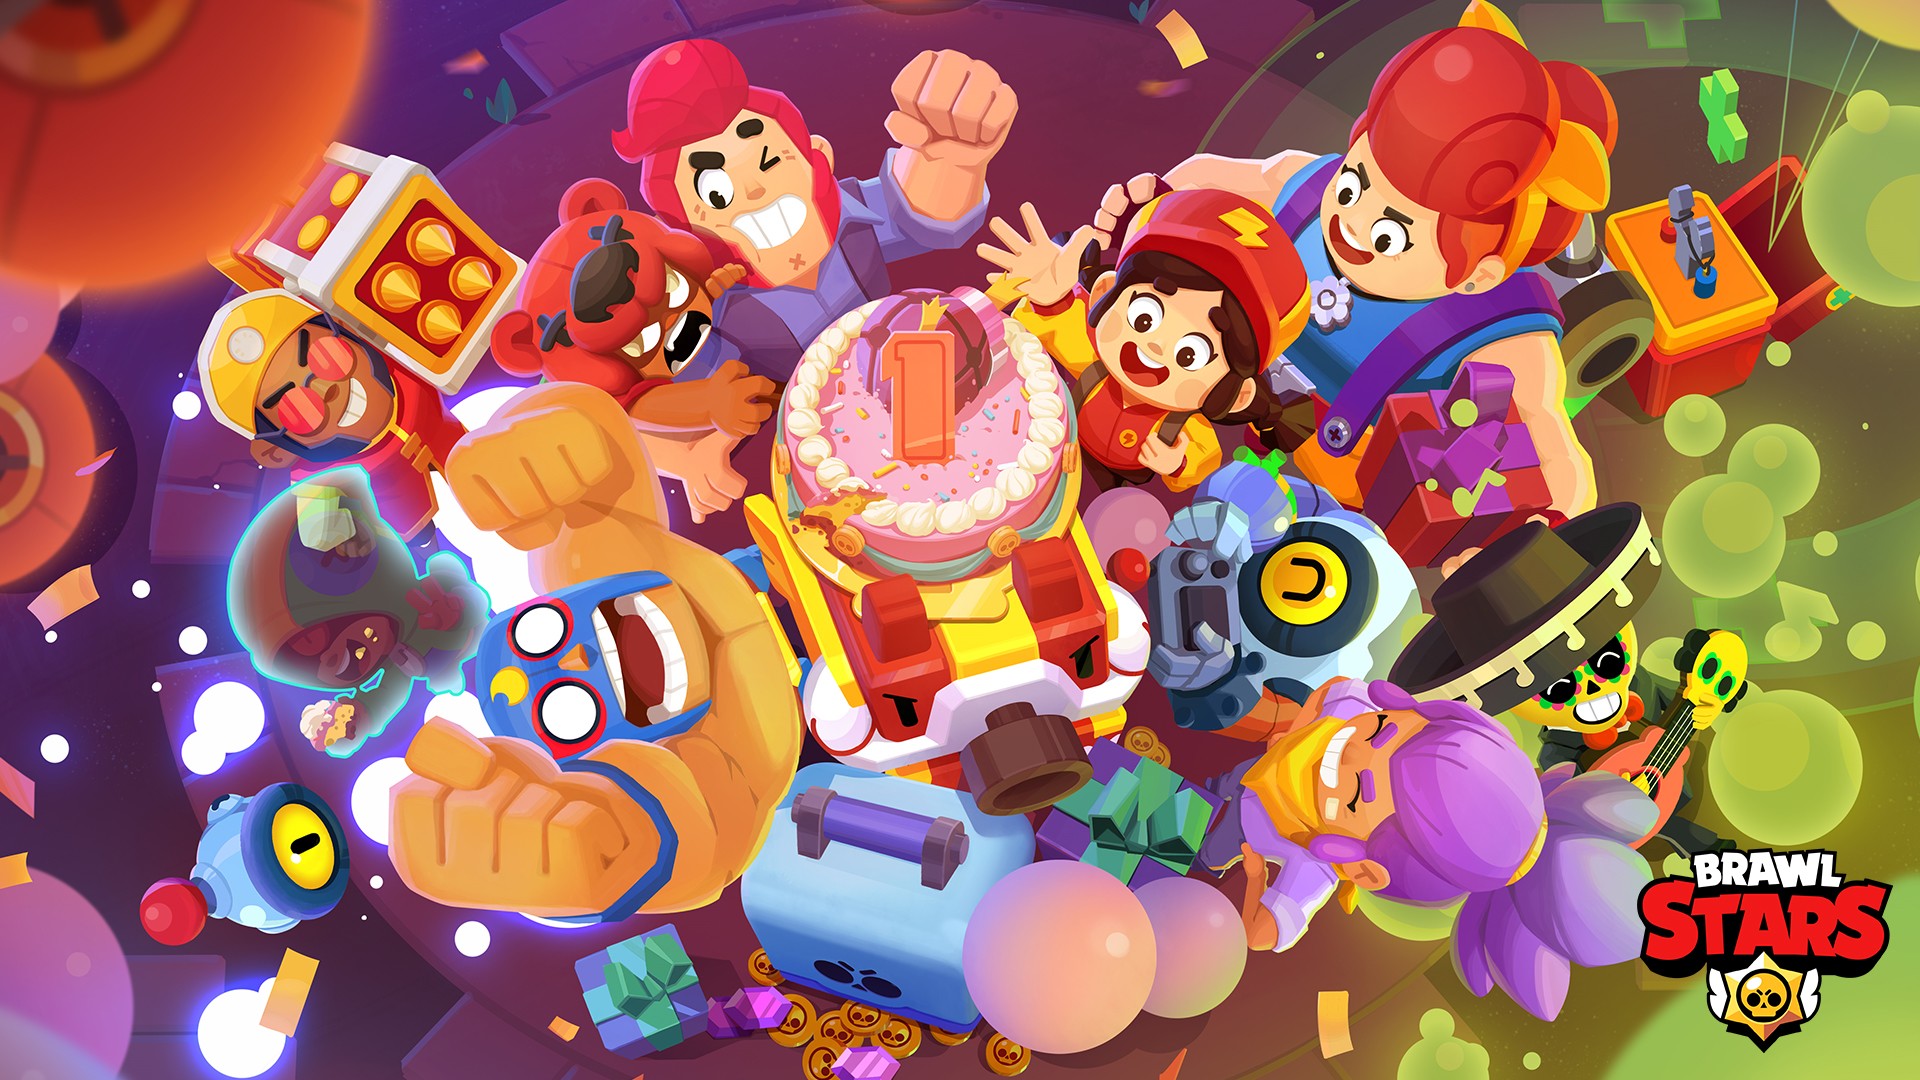 Dot Esports Free Boxes And Skins Up For Grabs In Brawl Stars To Celebrate One Year Anniversary Of China Release Steam News - brawls stars en españa